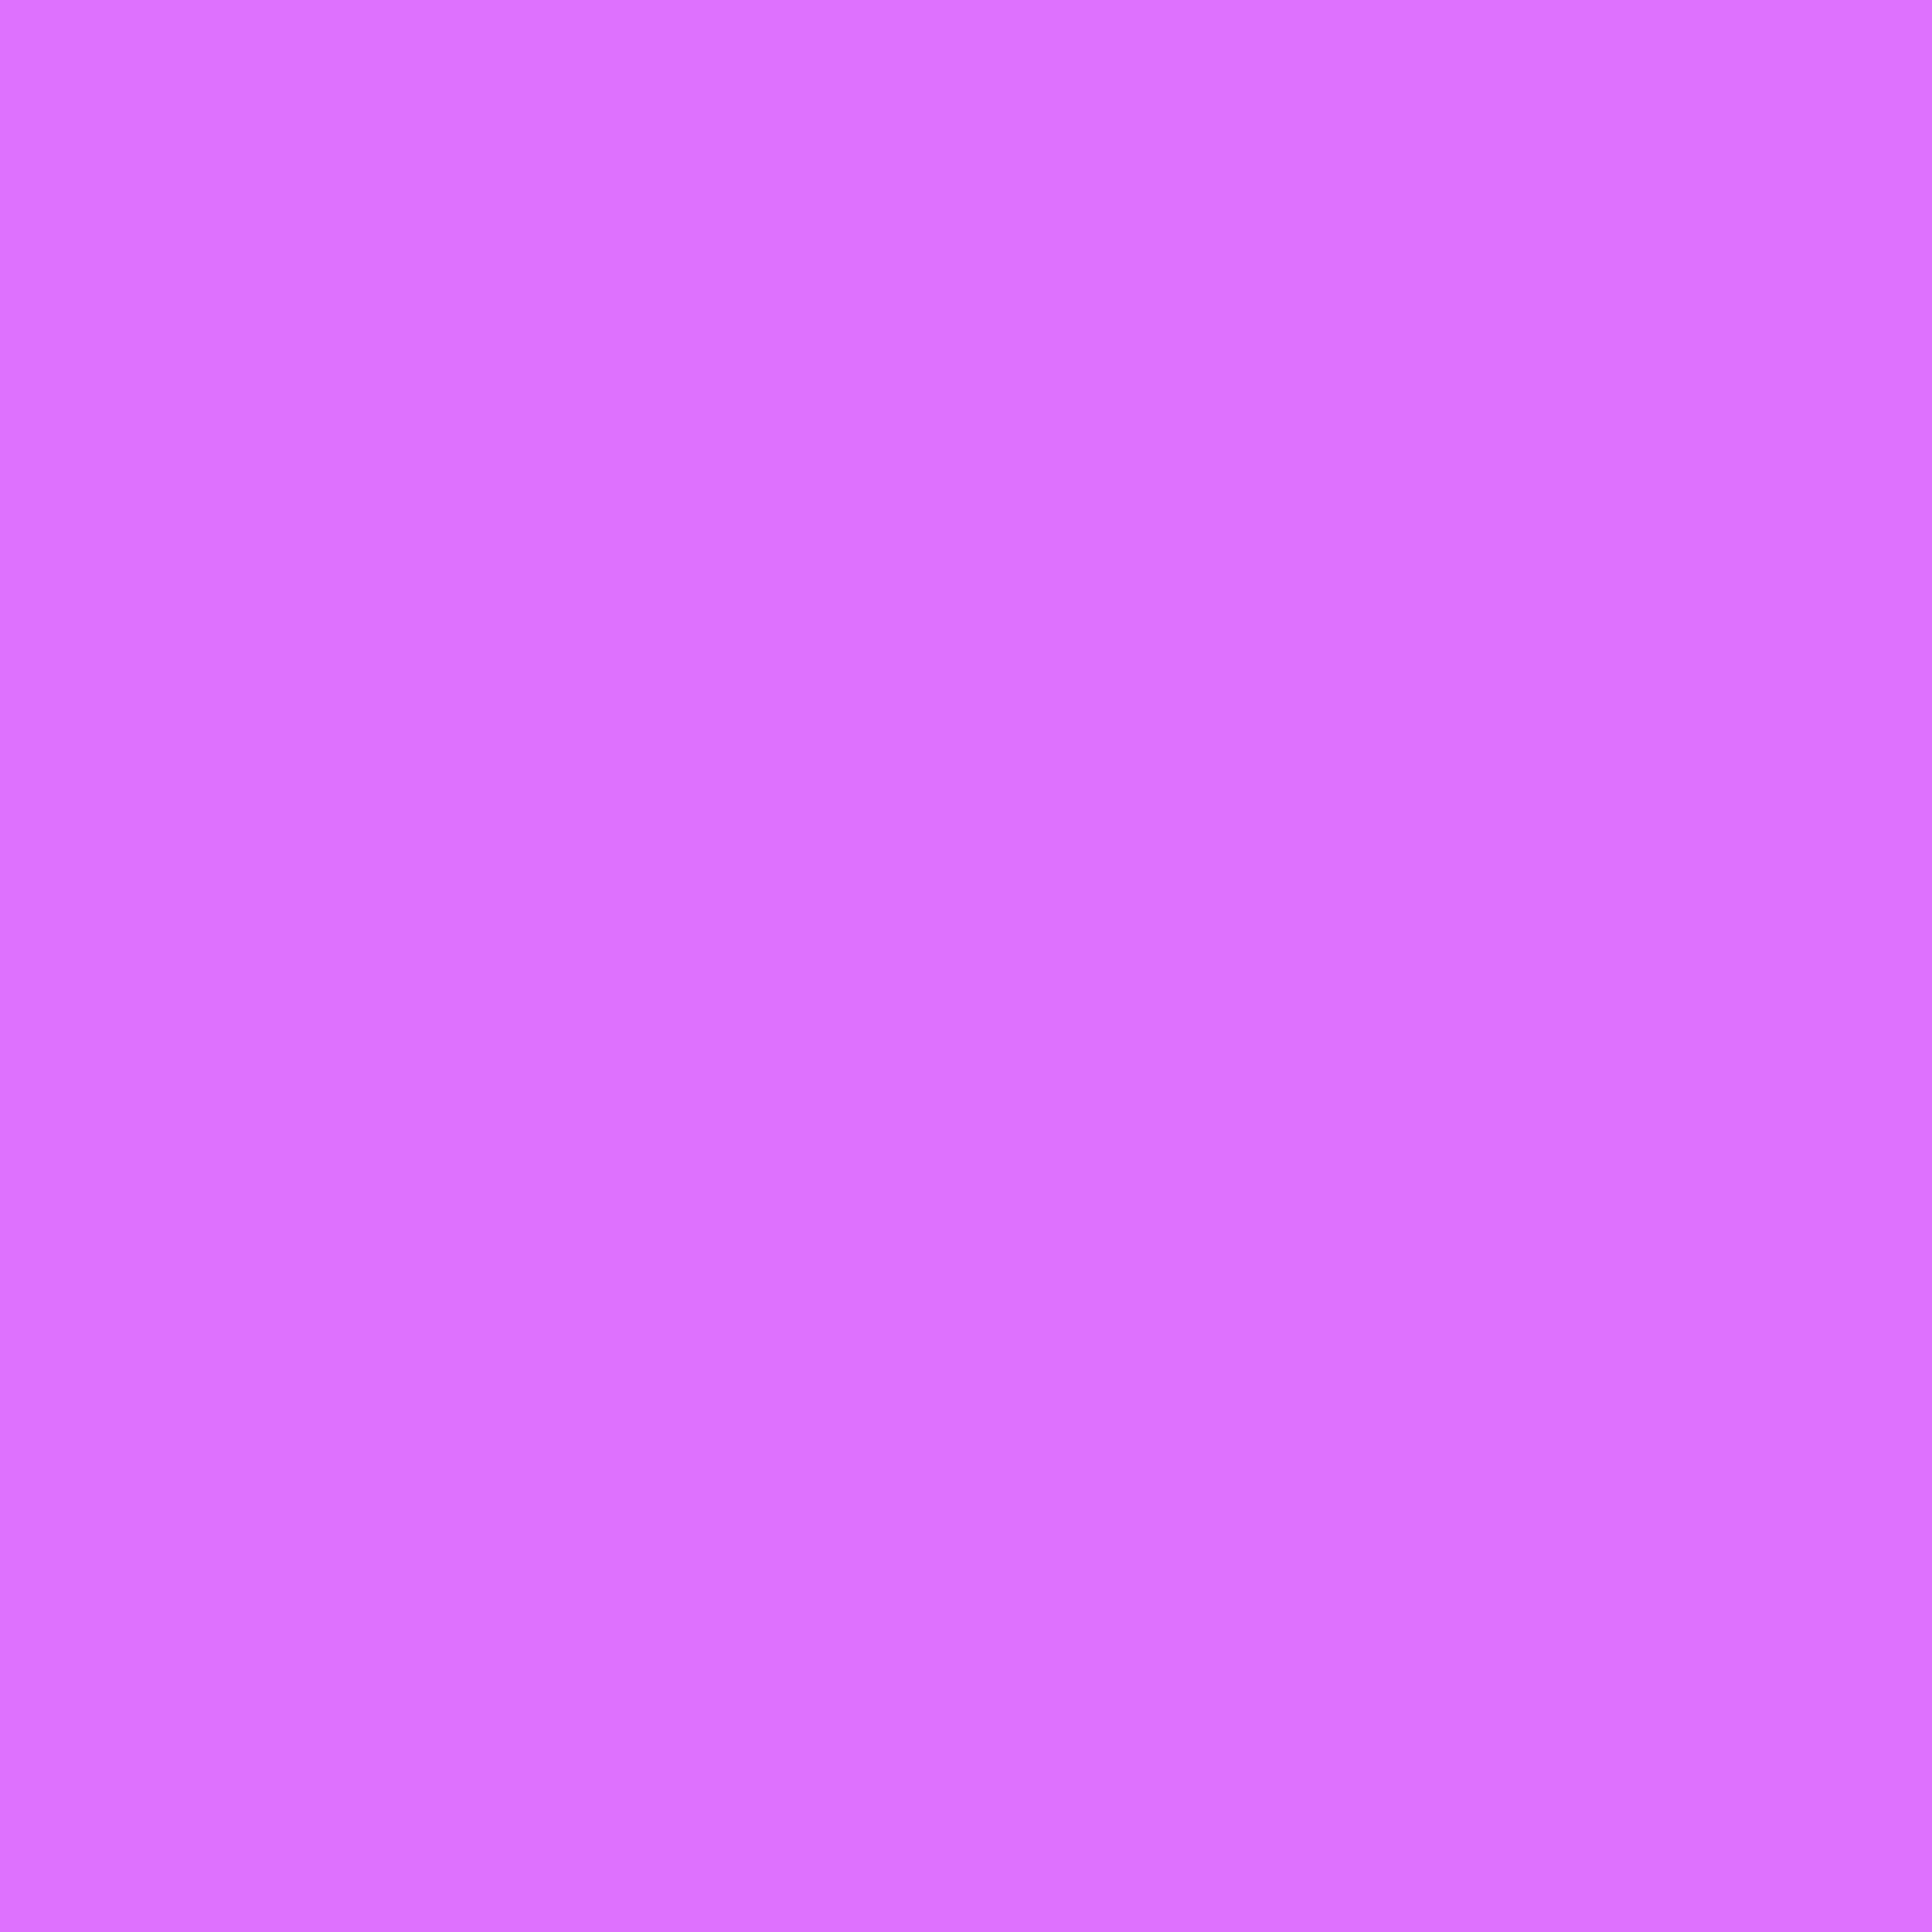 2732x2732 Heliotrope Solid Color Background